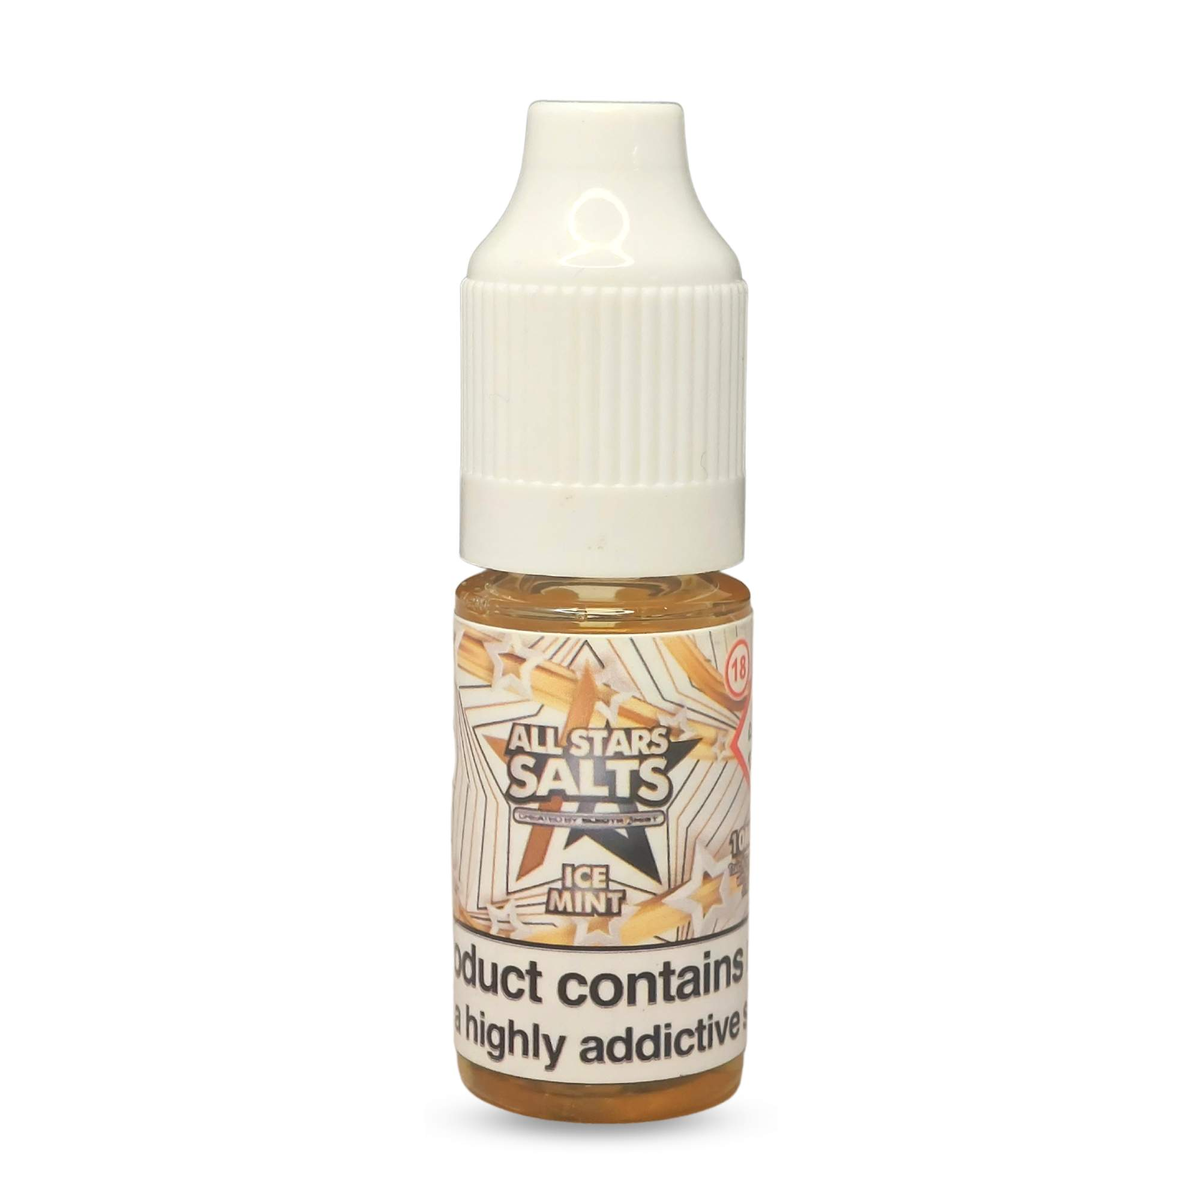 All Stars Salts from the vape brand you can trust, Electromist, . Get your taste buds ready for a flavour sensation, Ice Mint. Nicotine Content: 6mg/12mg/18mg Products may contain nicotine. For over 18s Only ejuice, vape pen, eliquid, e cigarette, 10ml, vaping, cloud, PG, VG, 60/40, vape liquid, Flavour, TPD